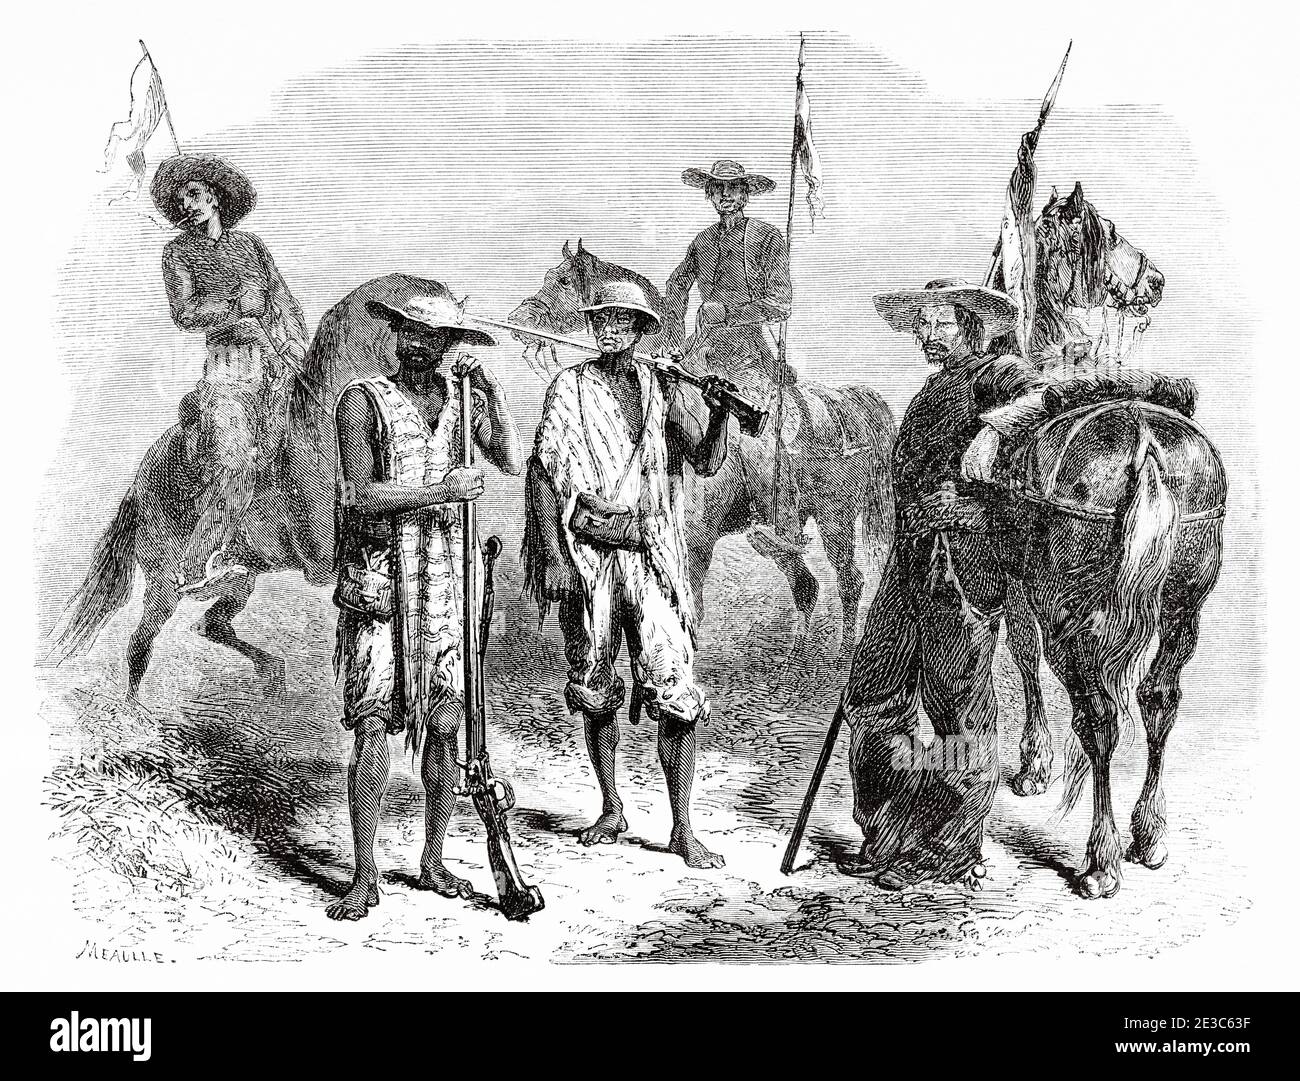 Soldiers from Cauca, Colombia. Old 19th century engraved illustration. Travel to New Granada by Charles Saffray from El Mundo en La Mano 1879 Stock Photo